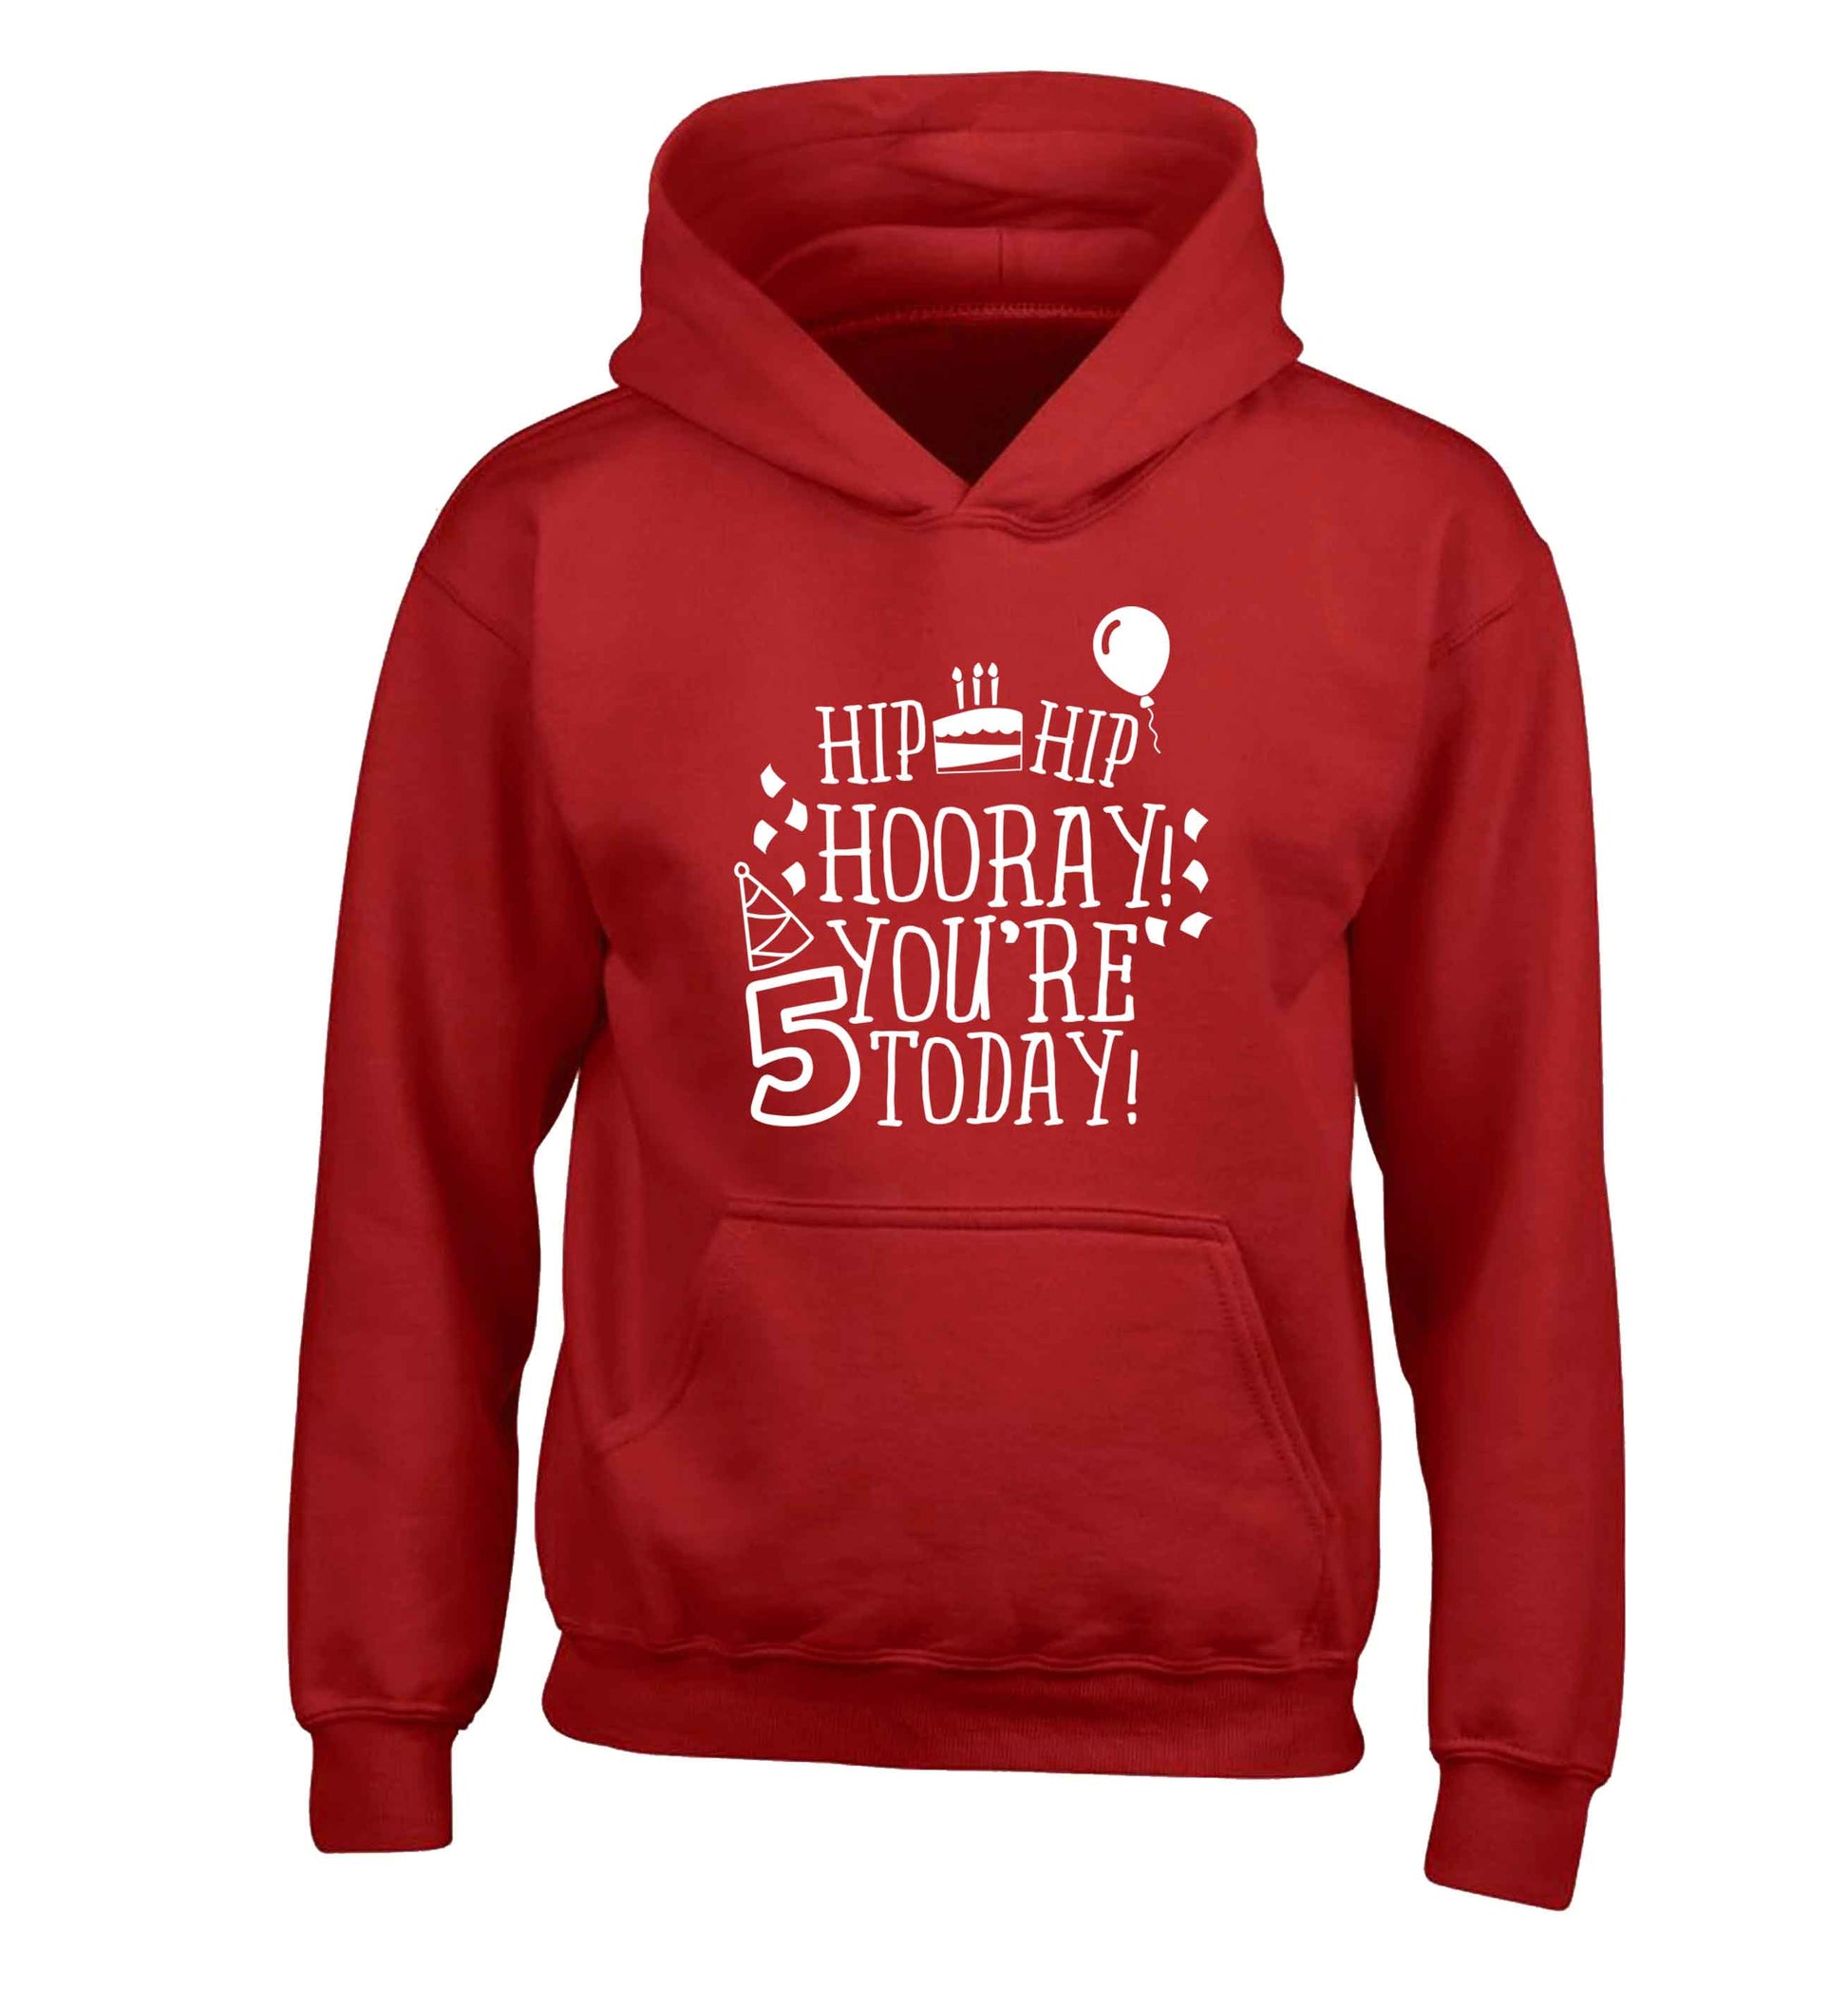 Hip hip hooray you're five today! children's red hoodie 12-13 Years